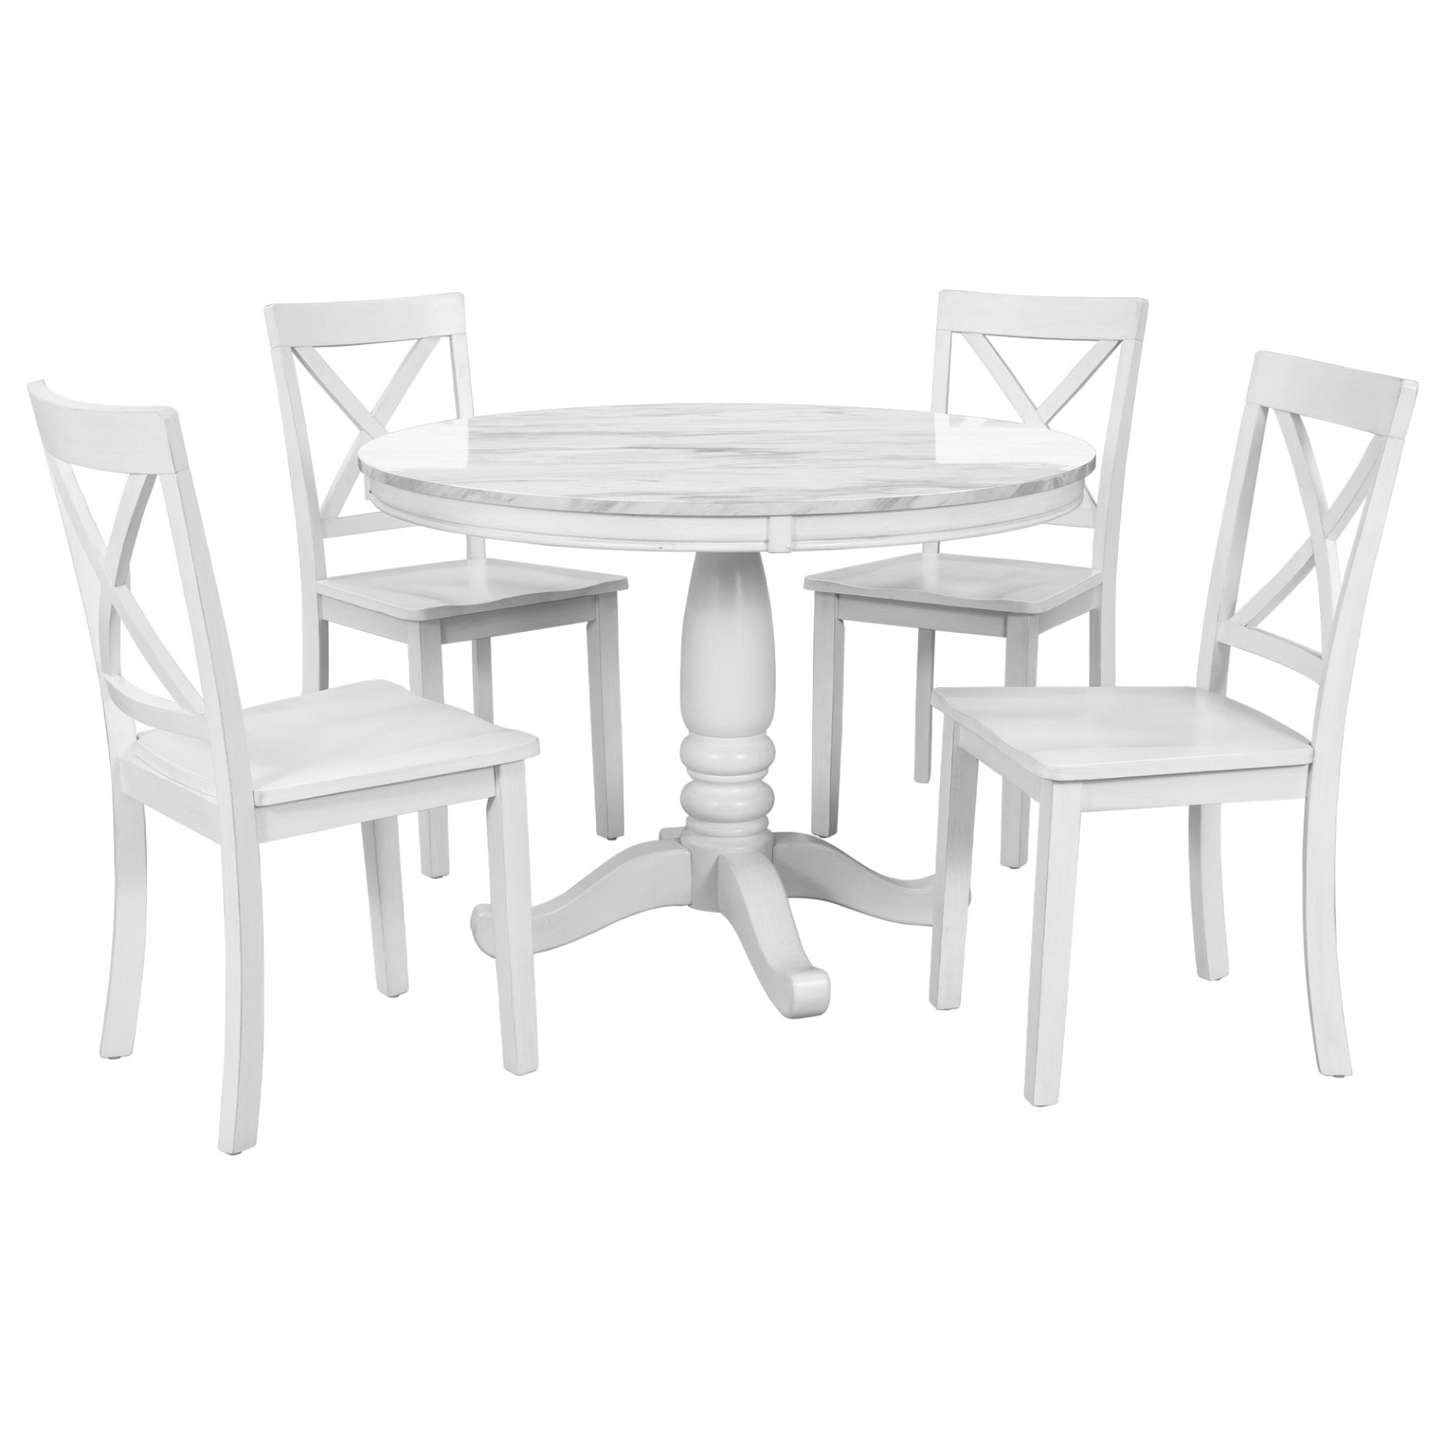 Dining Table Set, Solid Wood Table w/4 Chairs -5 pcs.